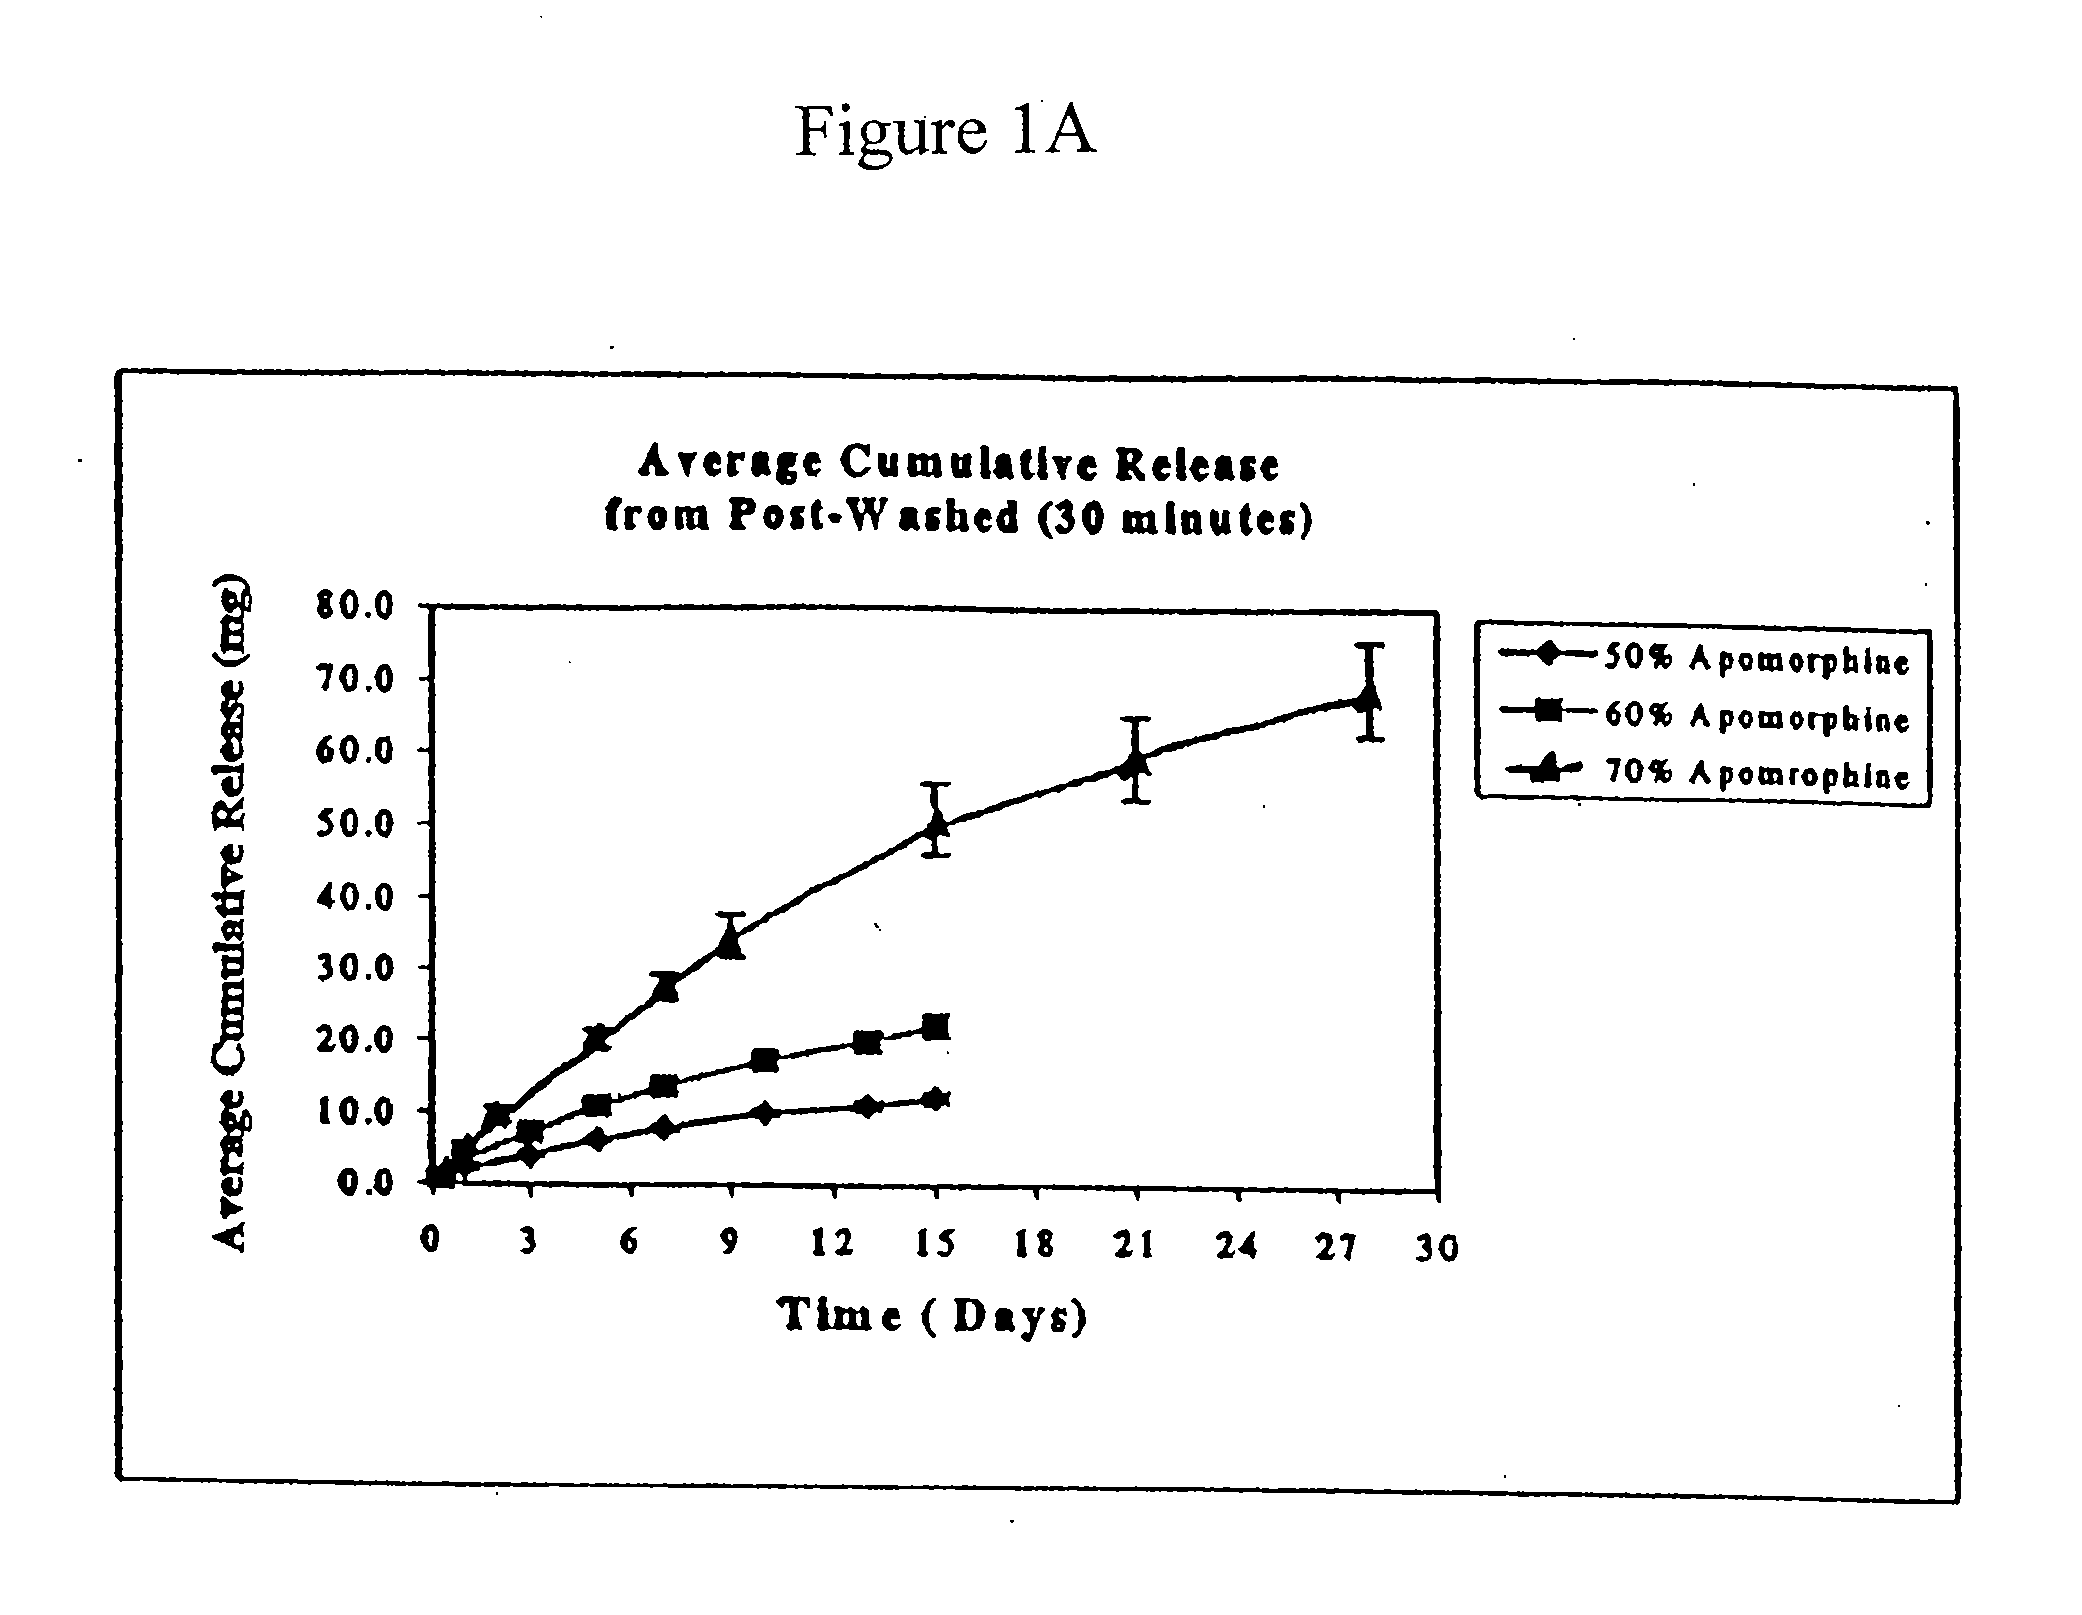 Implantable polymeric device for sustained release of dopamine agonist